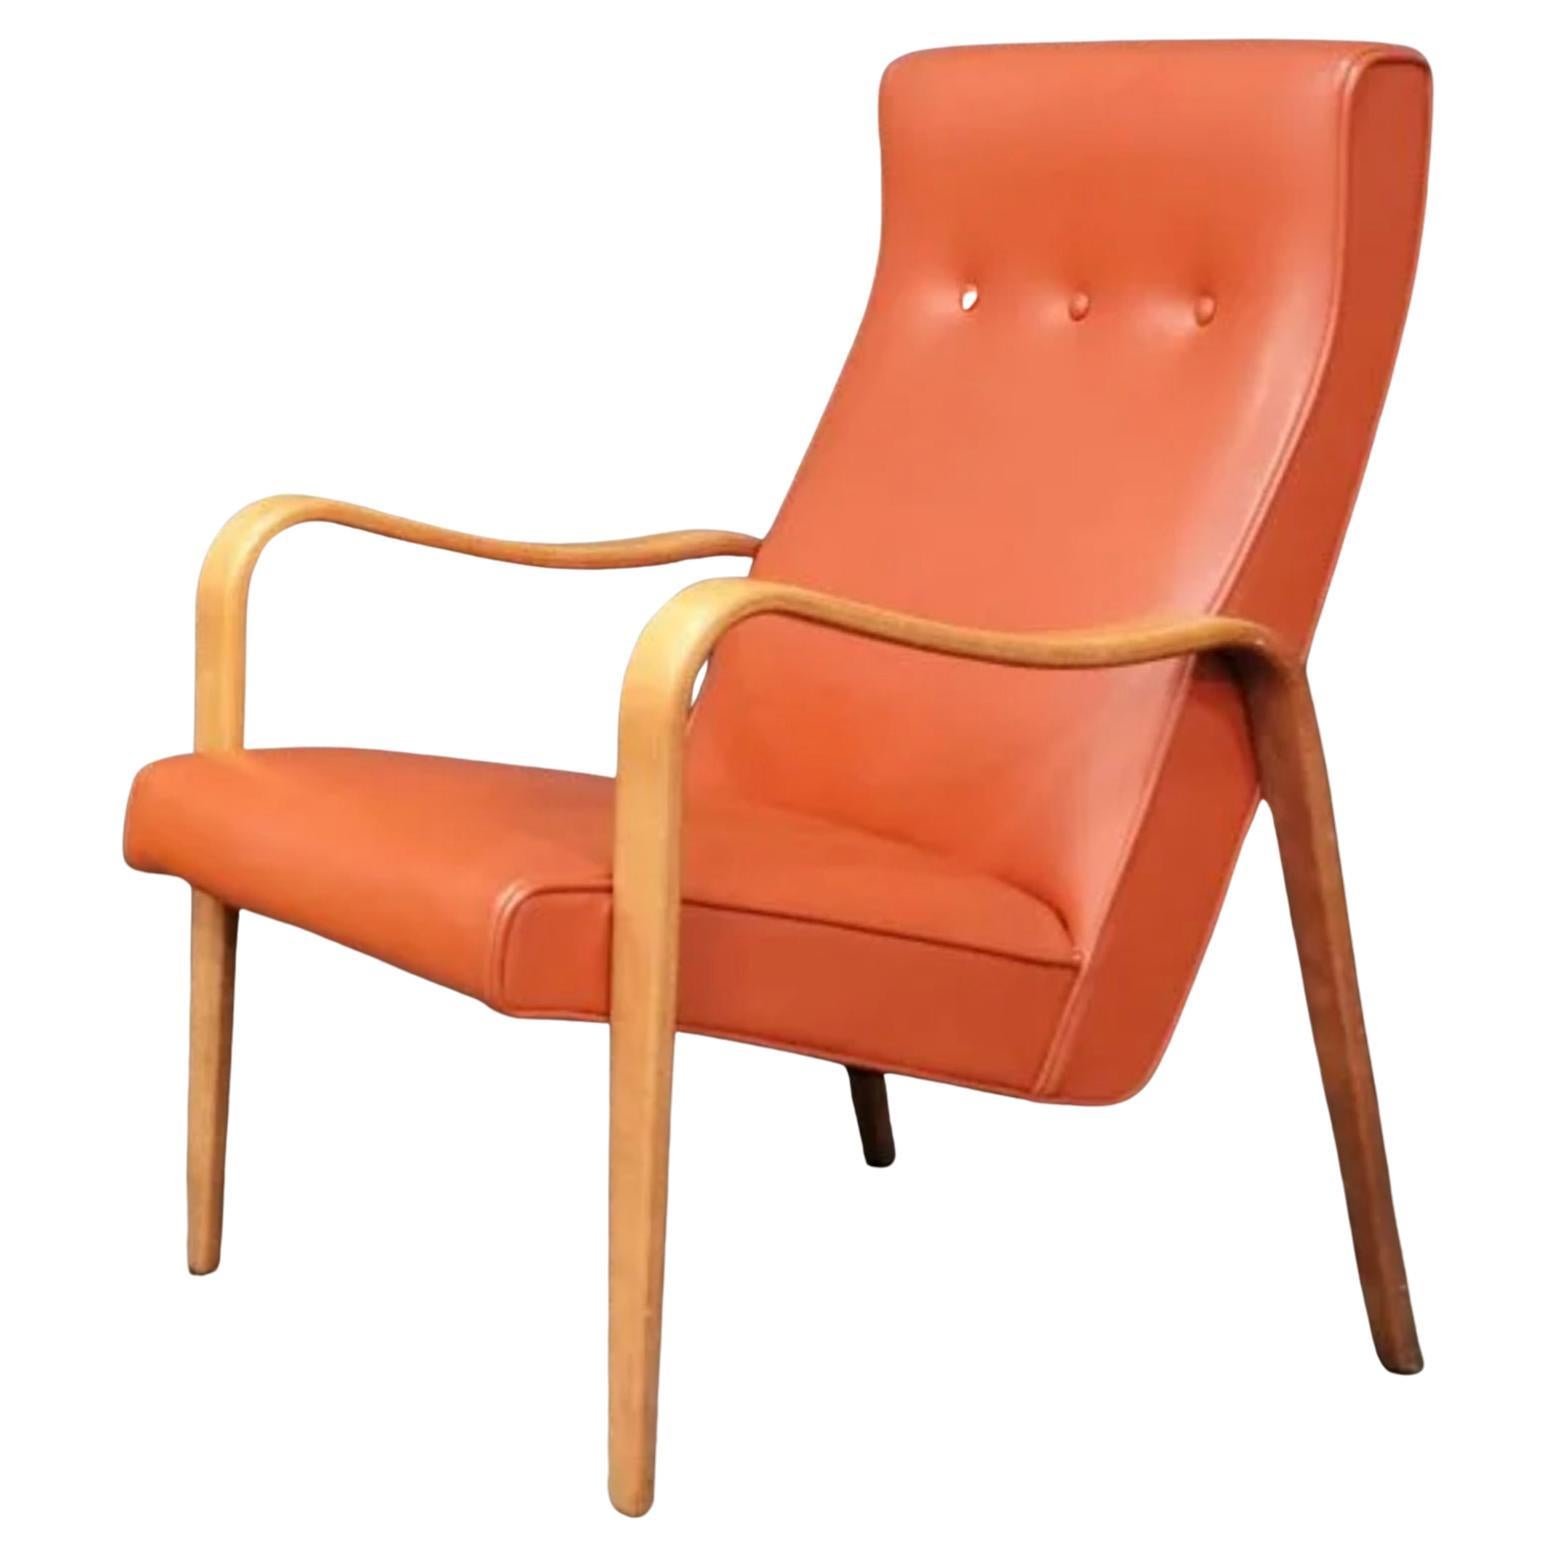 Mid-Century Modern Thonet Bentwood Birch Lounge Armchair Reddish Orange In Good Condition For Sale In BROOKLYN, NY